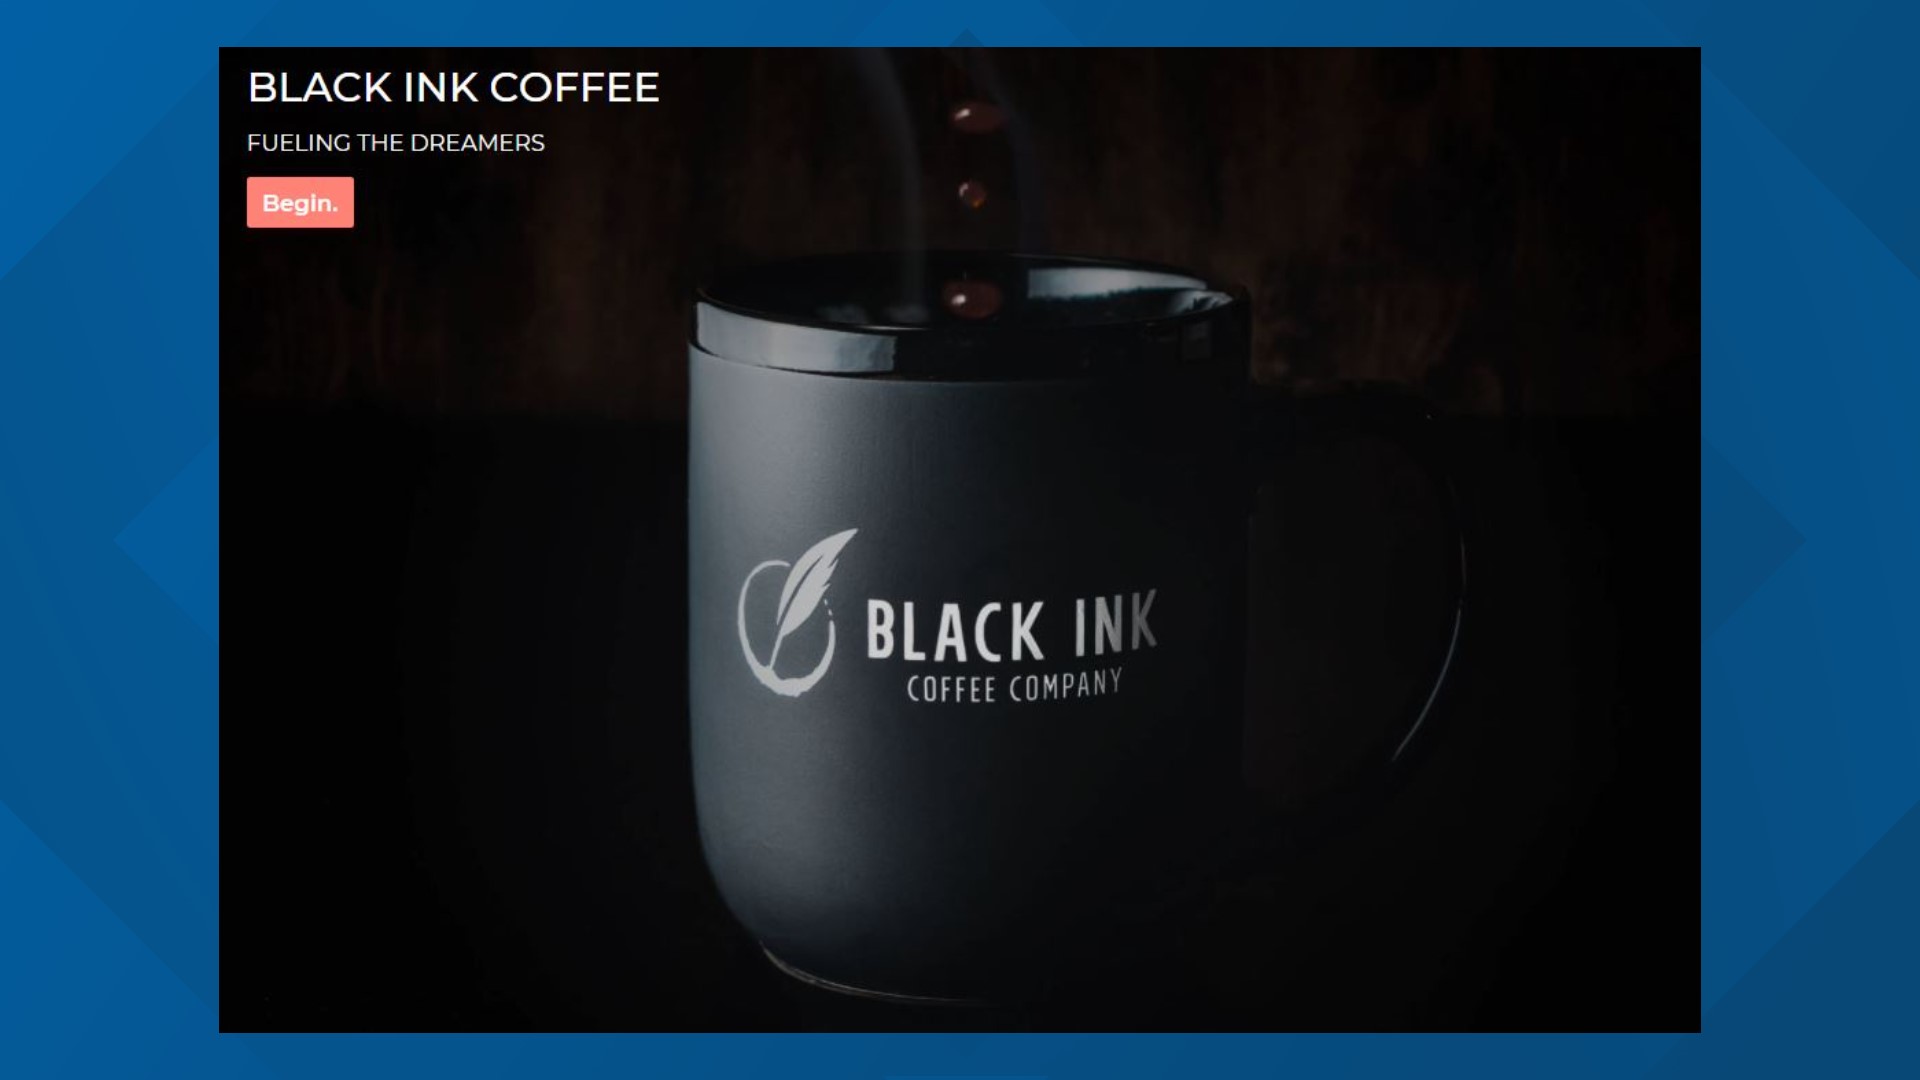 Parker Russell hopes to encourage others to follow their dreams as he establishes Black Ink Coffee.